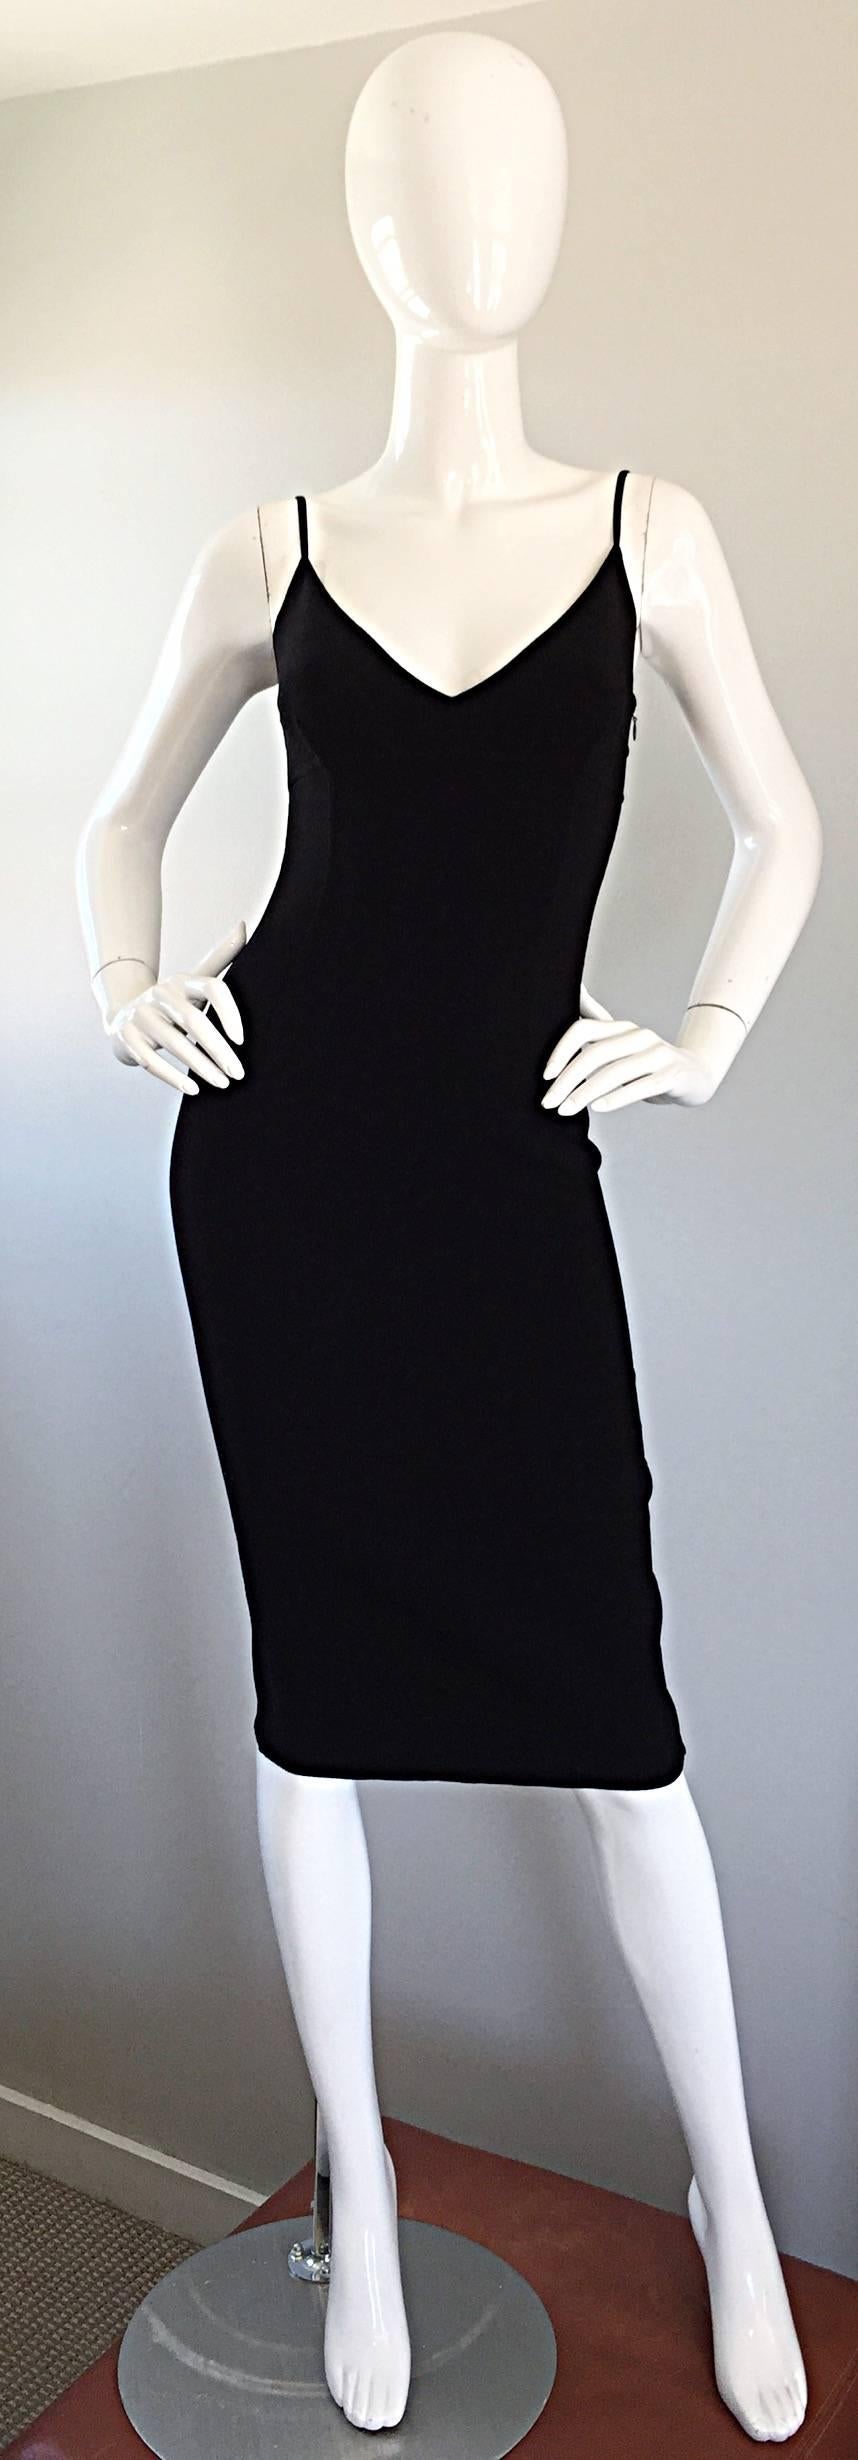 Sexy late 90s MICHAEL KORS COLLECTION (Runway Collection) signature little black dress! Crafted in the designer's signature double face wool jersey, this dress is the the perfect vintage LBD! Kors is known in the fashion industry for creating